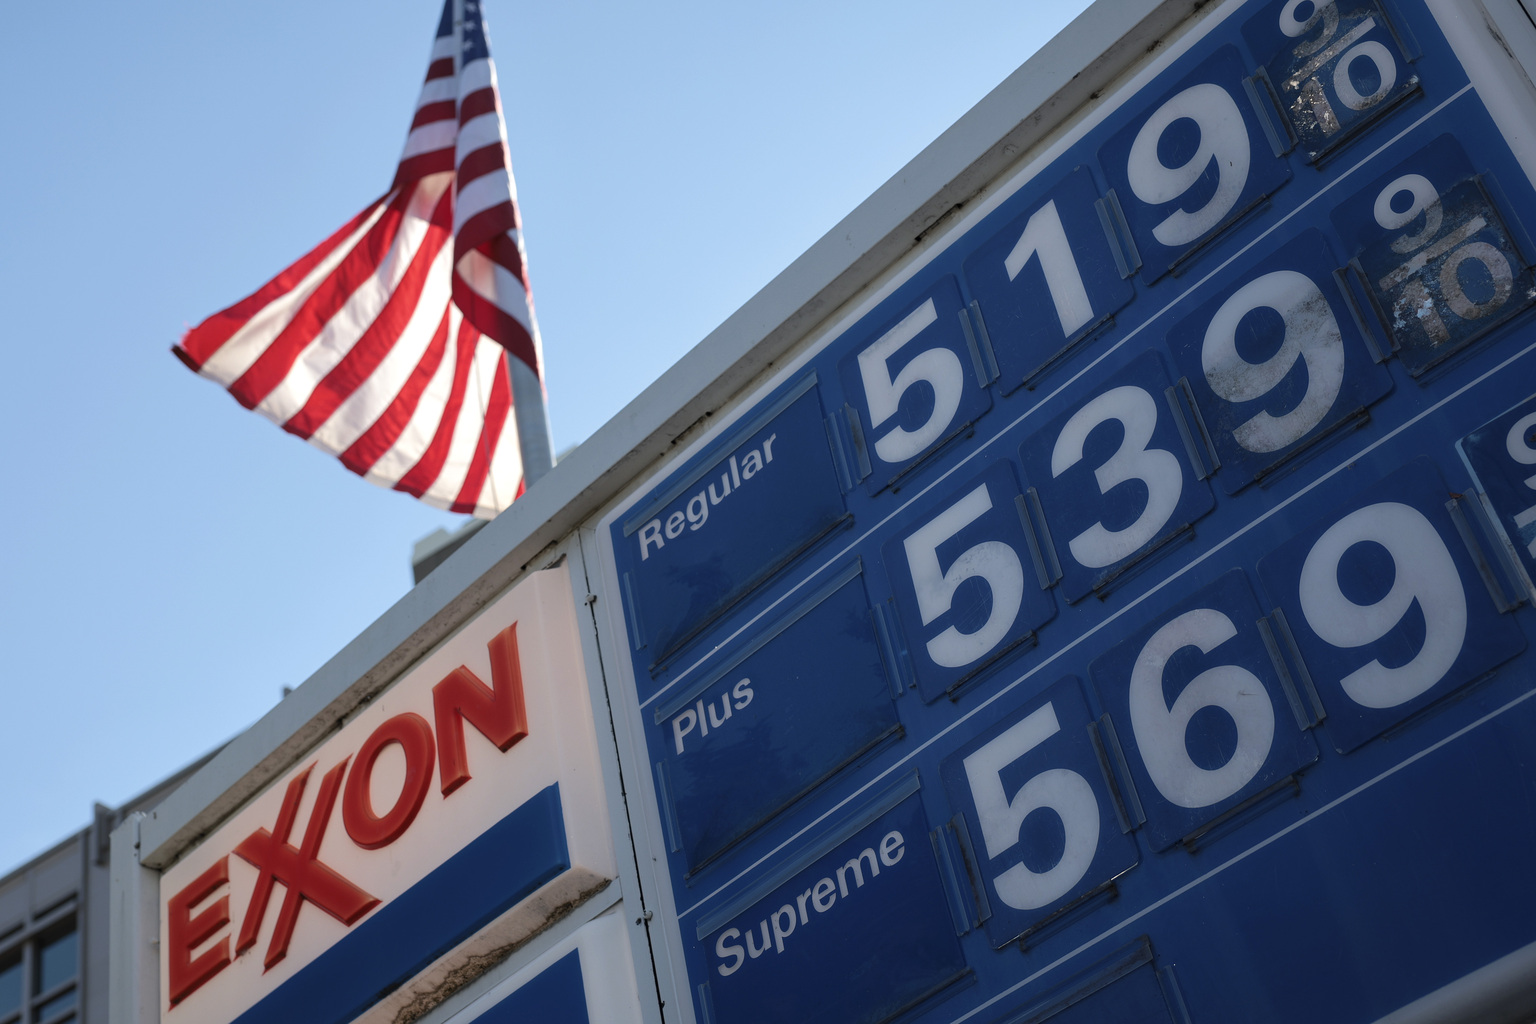 Exxon Mobil: The Good, The Bad, And The Very Ugly